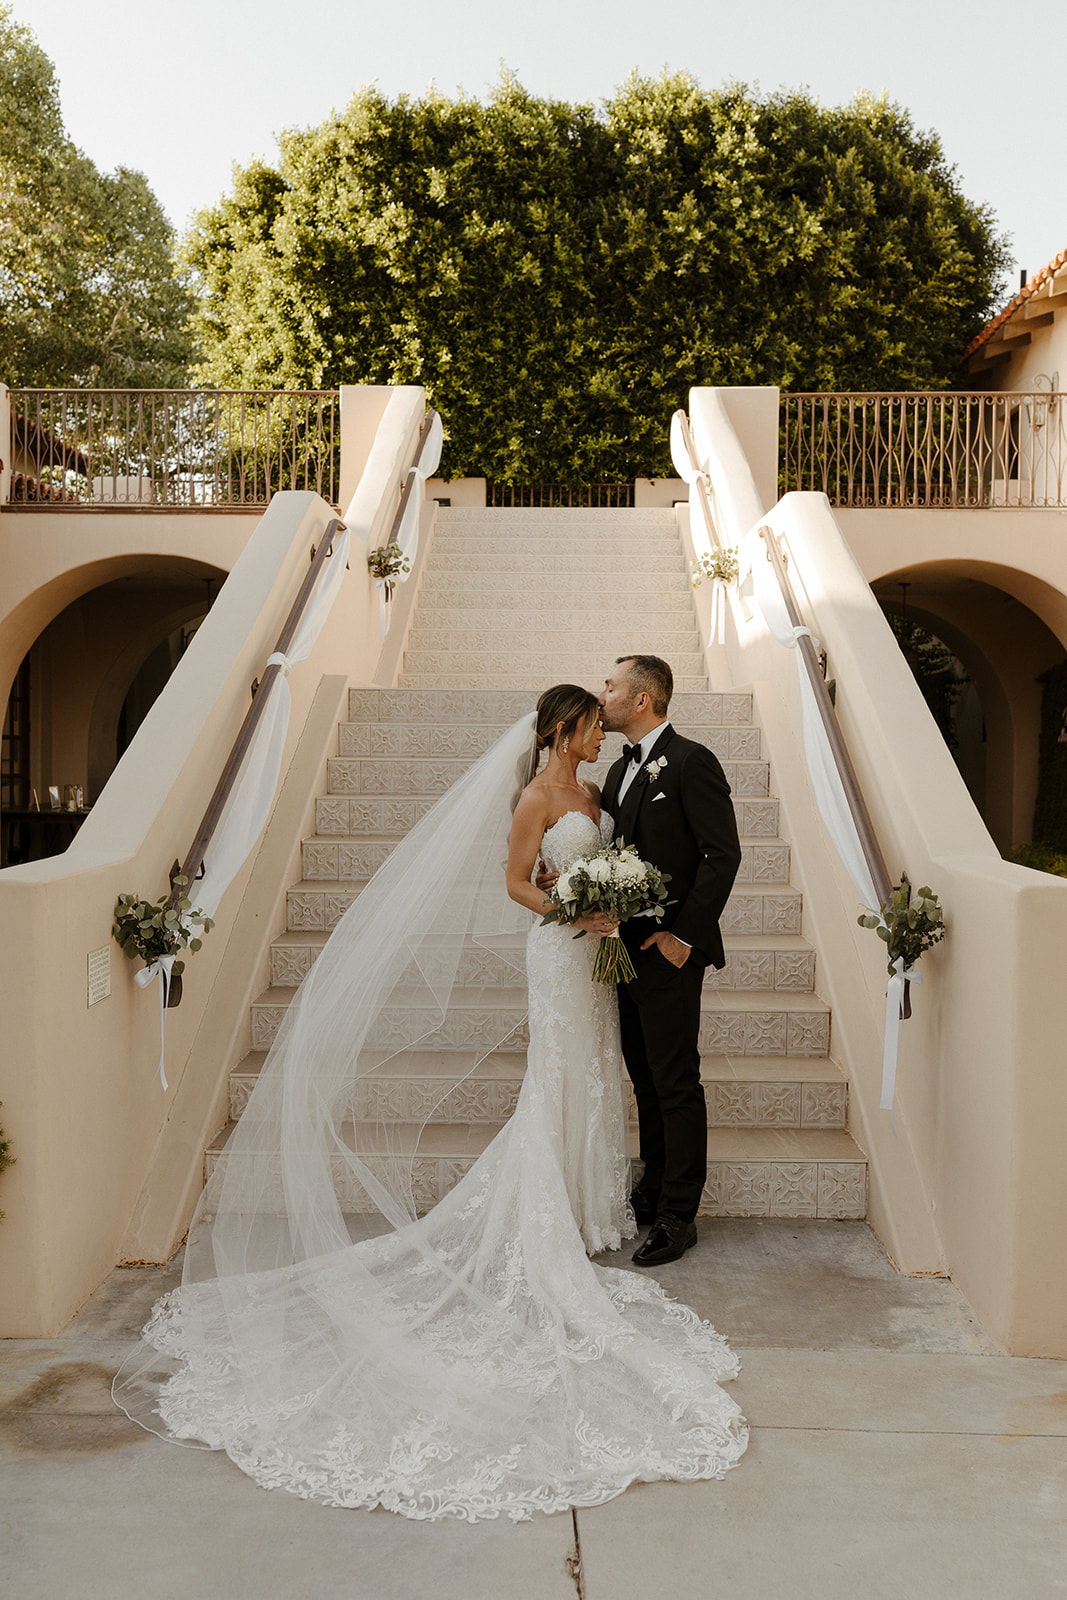 Bride and groom share an intimate moment together after their Arizona wedding day